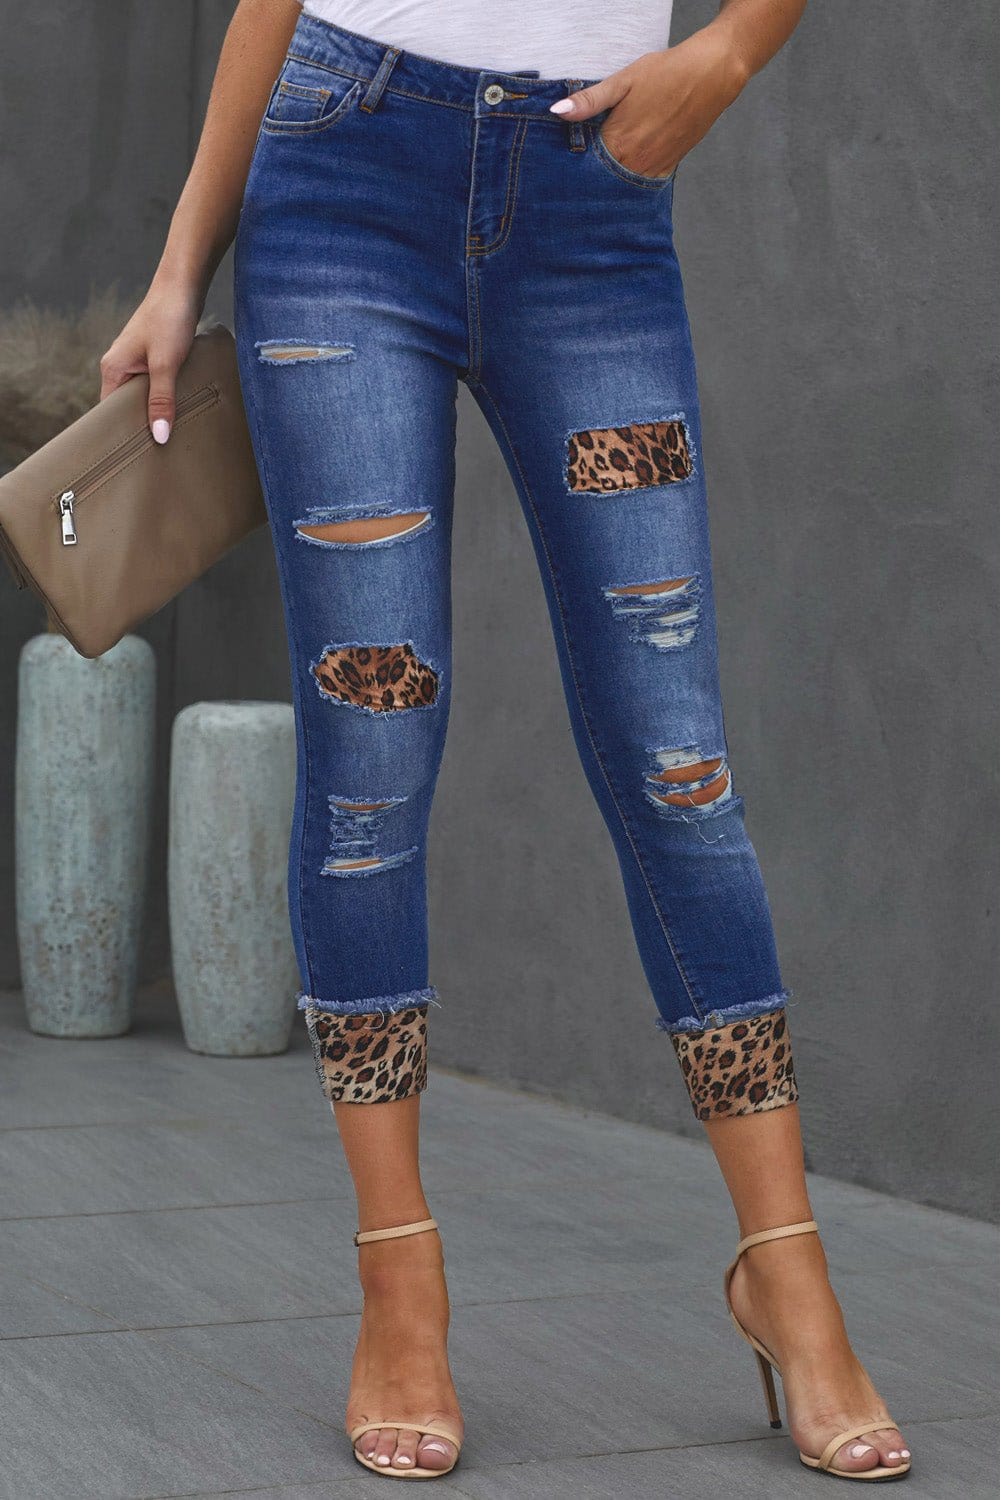 Baeful Leopard Patch Distressed Cropped Jeans - CLASSY CLOSET BOUTIQUEBaeful Leopard Patch Distressed Cropped Jeanspants100100251028071100100251028071BlueL